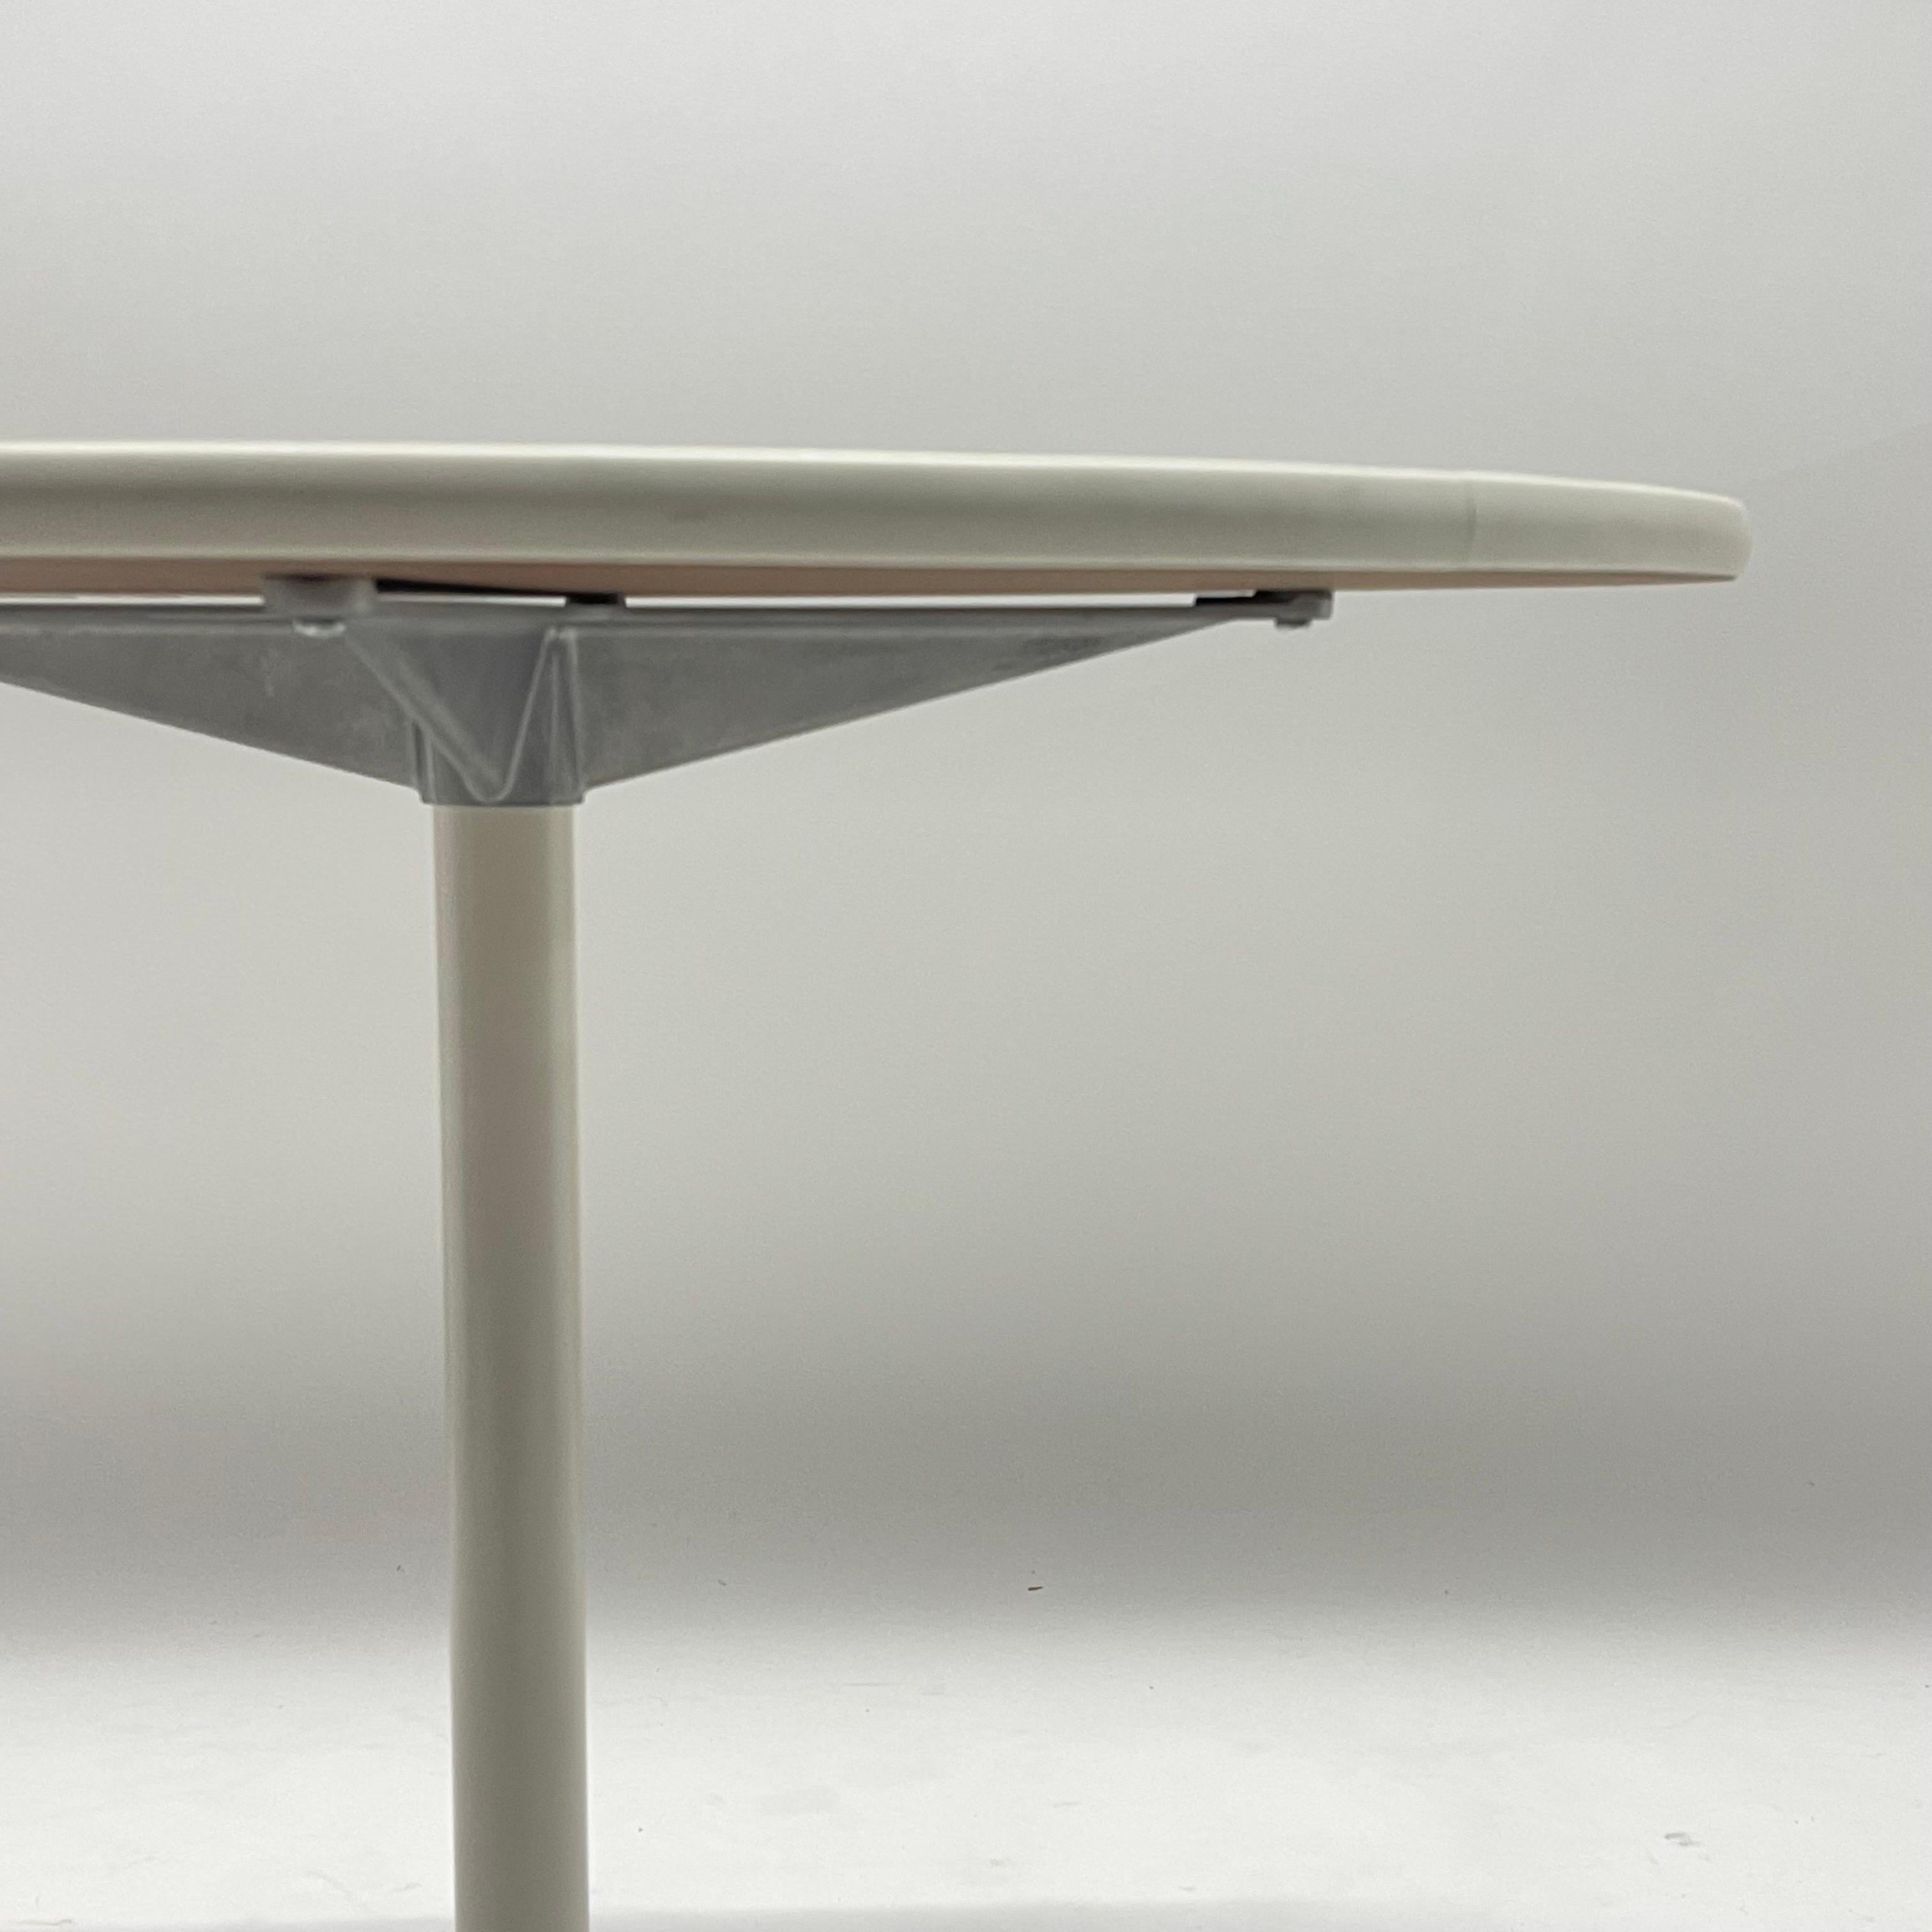 Polished Contemporary Herman Miller Eames Aluminum Dining Bistro Table, USA, circa 2000s For Sale